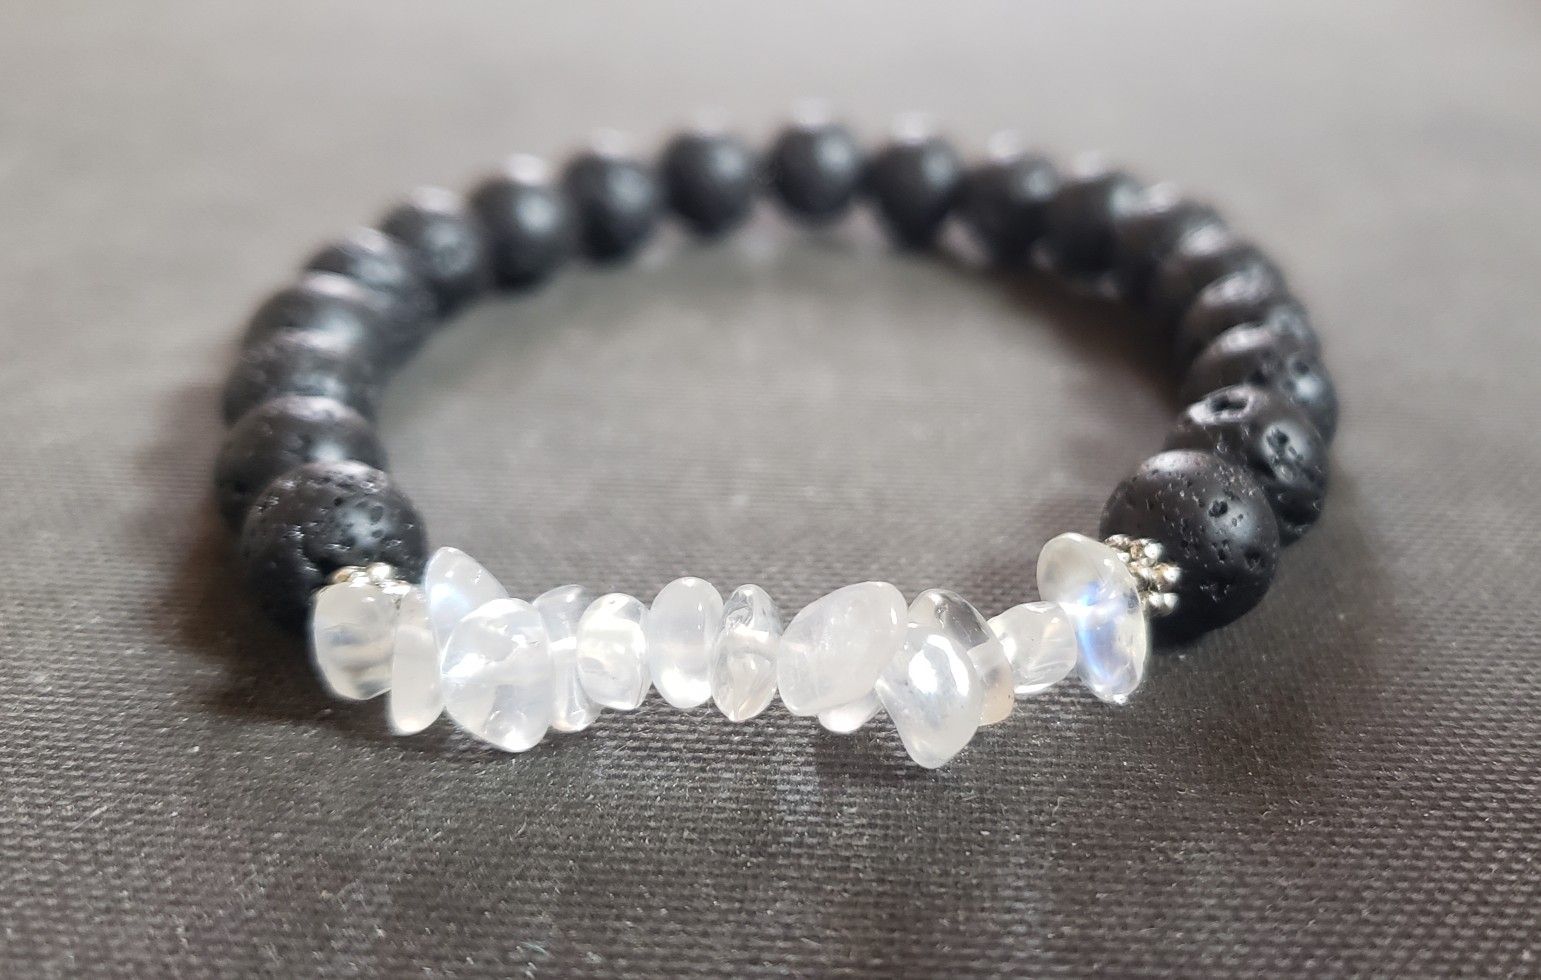 NATURAL stone- Moonstone Lava Rock Oil Essential Bracelet(healing,reduce stress,calm emotions,Success in Love & Business,Health benefits-see photos)